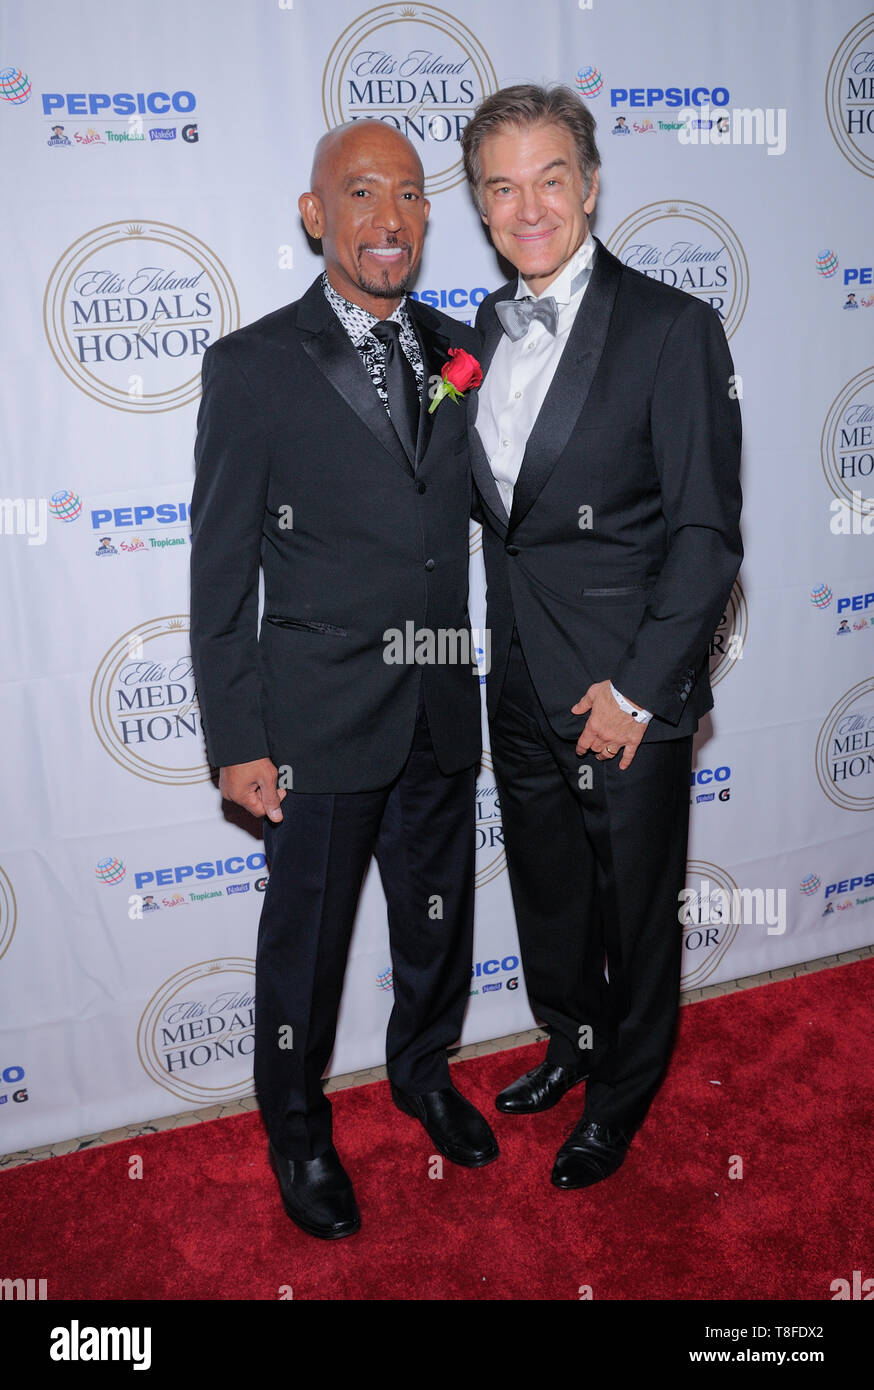 Ellis Island, NY - May 11, 2019: Montel Williams and Mehmet Oz attend the 34th Annual Ellis Island Medals Of Honor Ceremony at Ellis Island Stock Photo